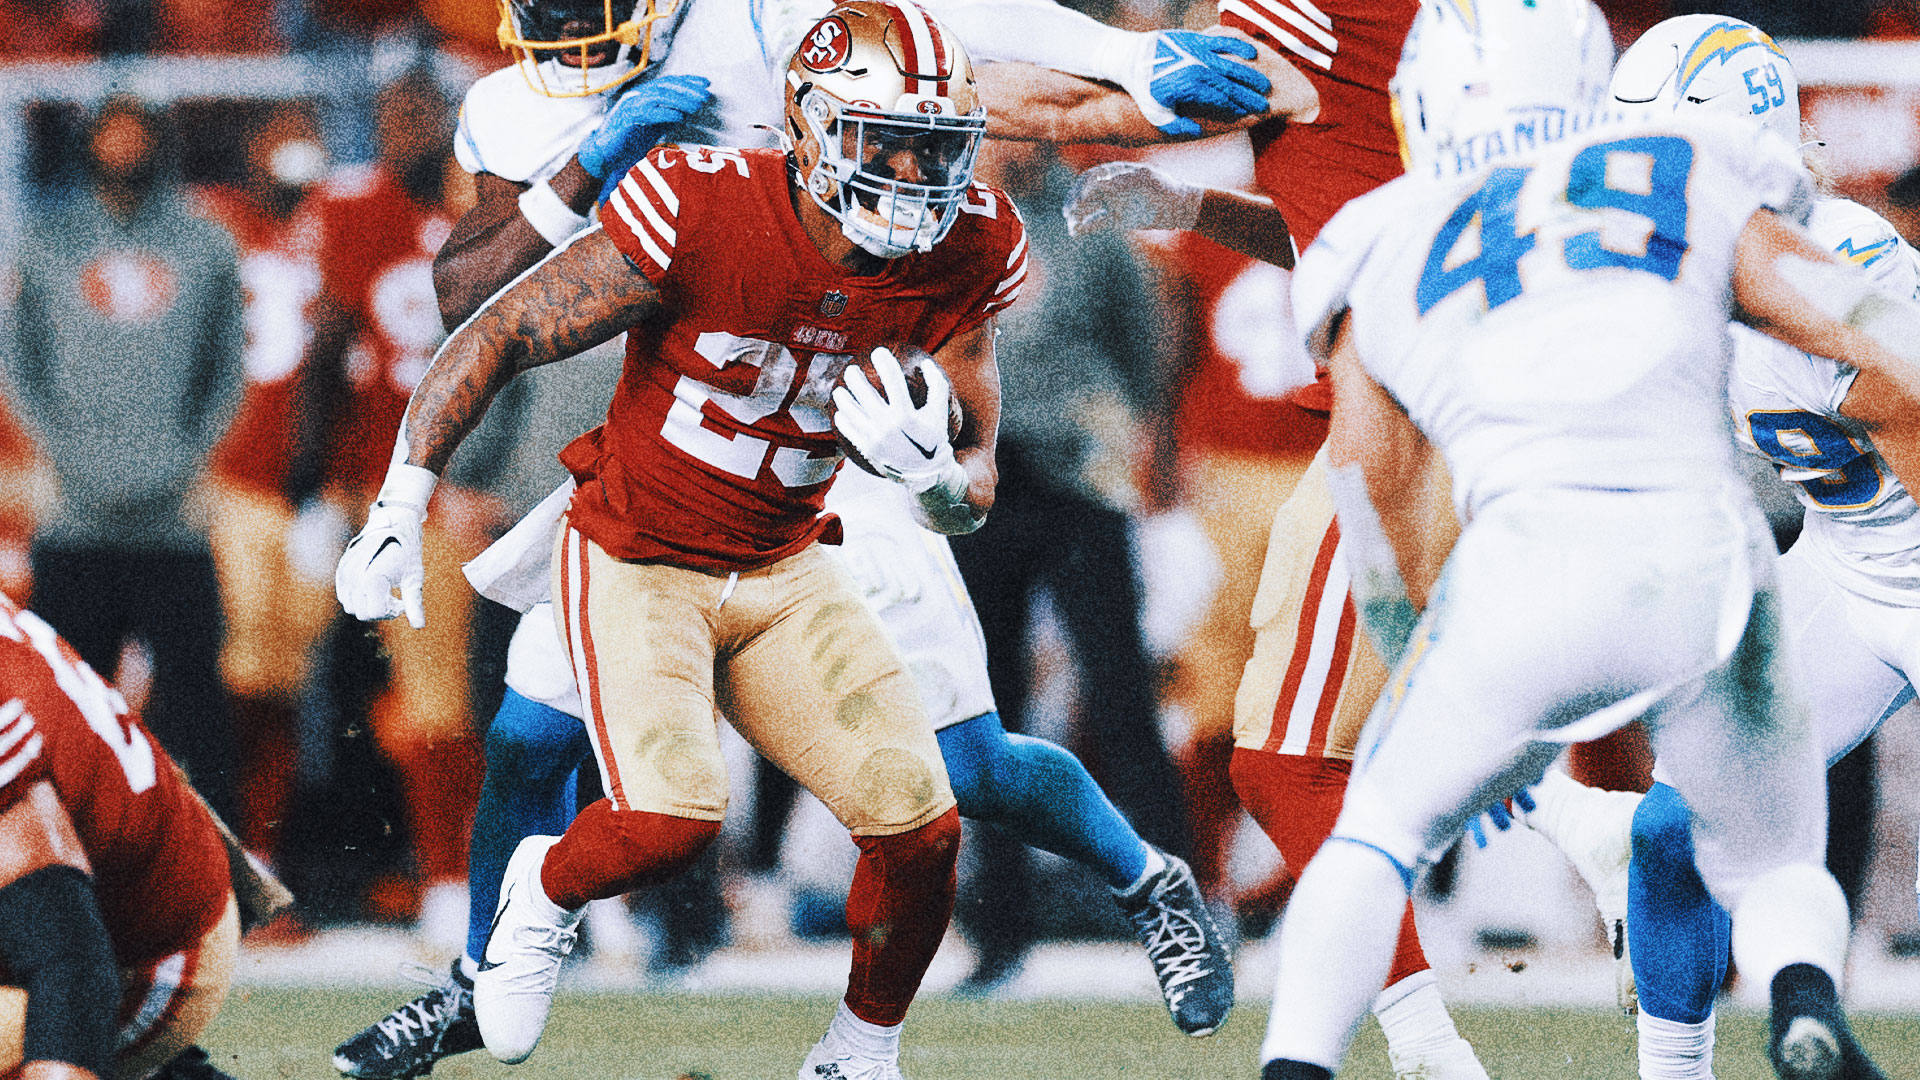 49ers v chargers tickets